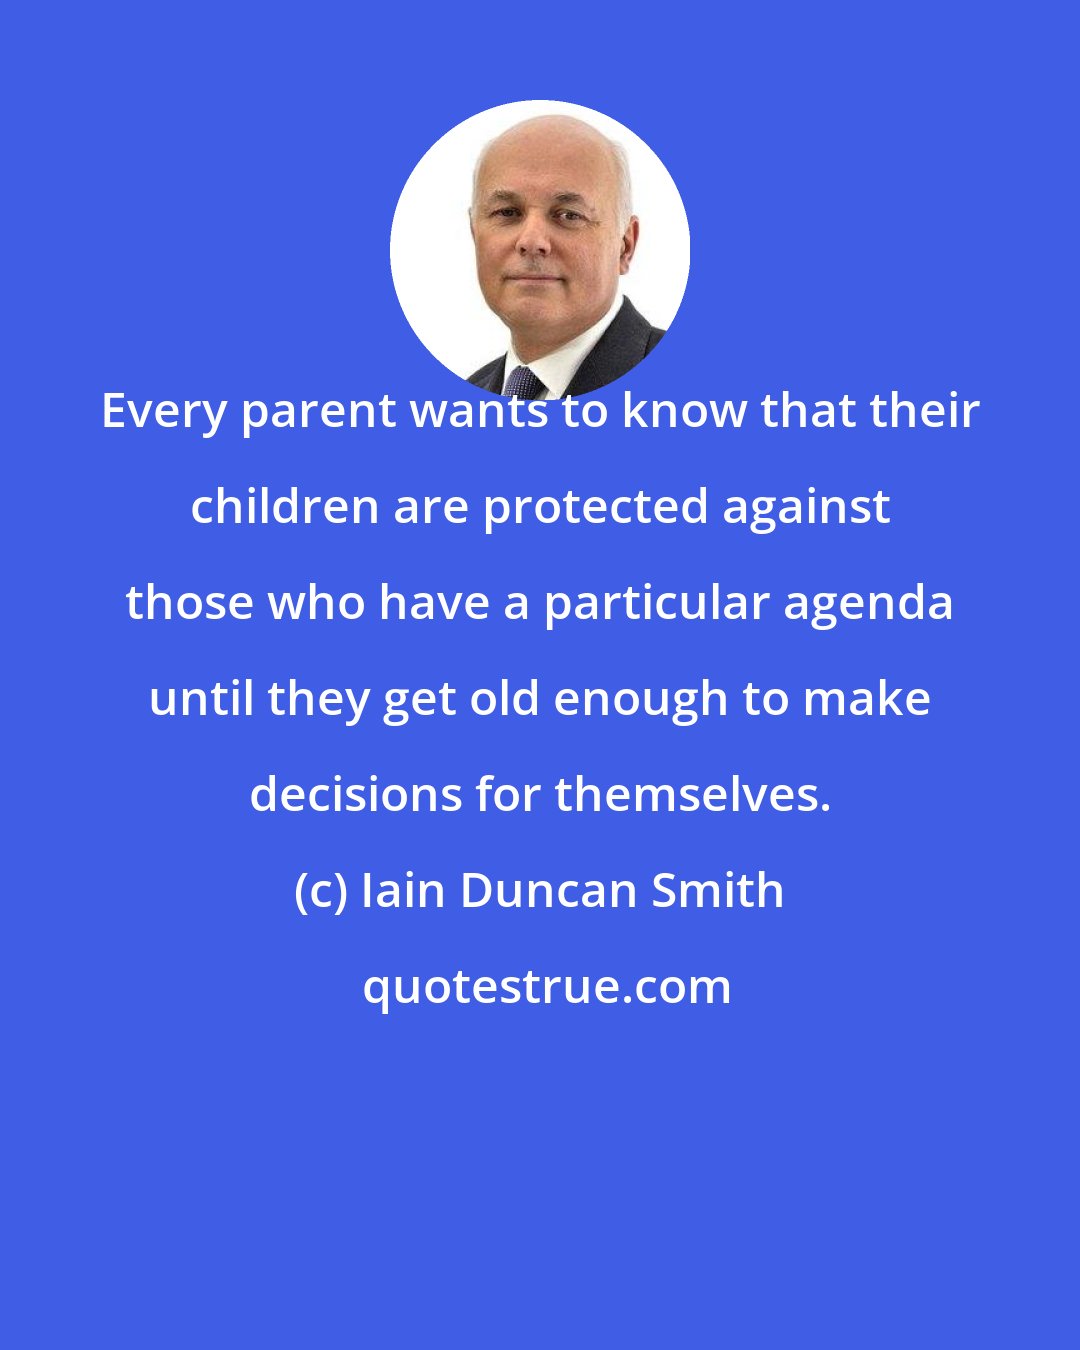 Iain Duncan Smith: Every parent wants to know that their children are protected against those who have a particular agenda until they get old enough to make decisions for themselves.